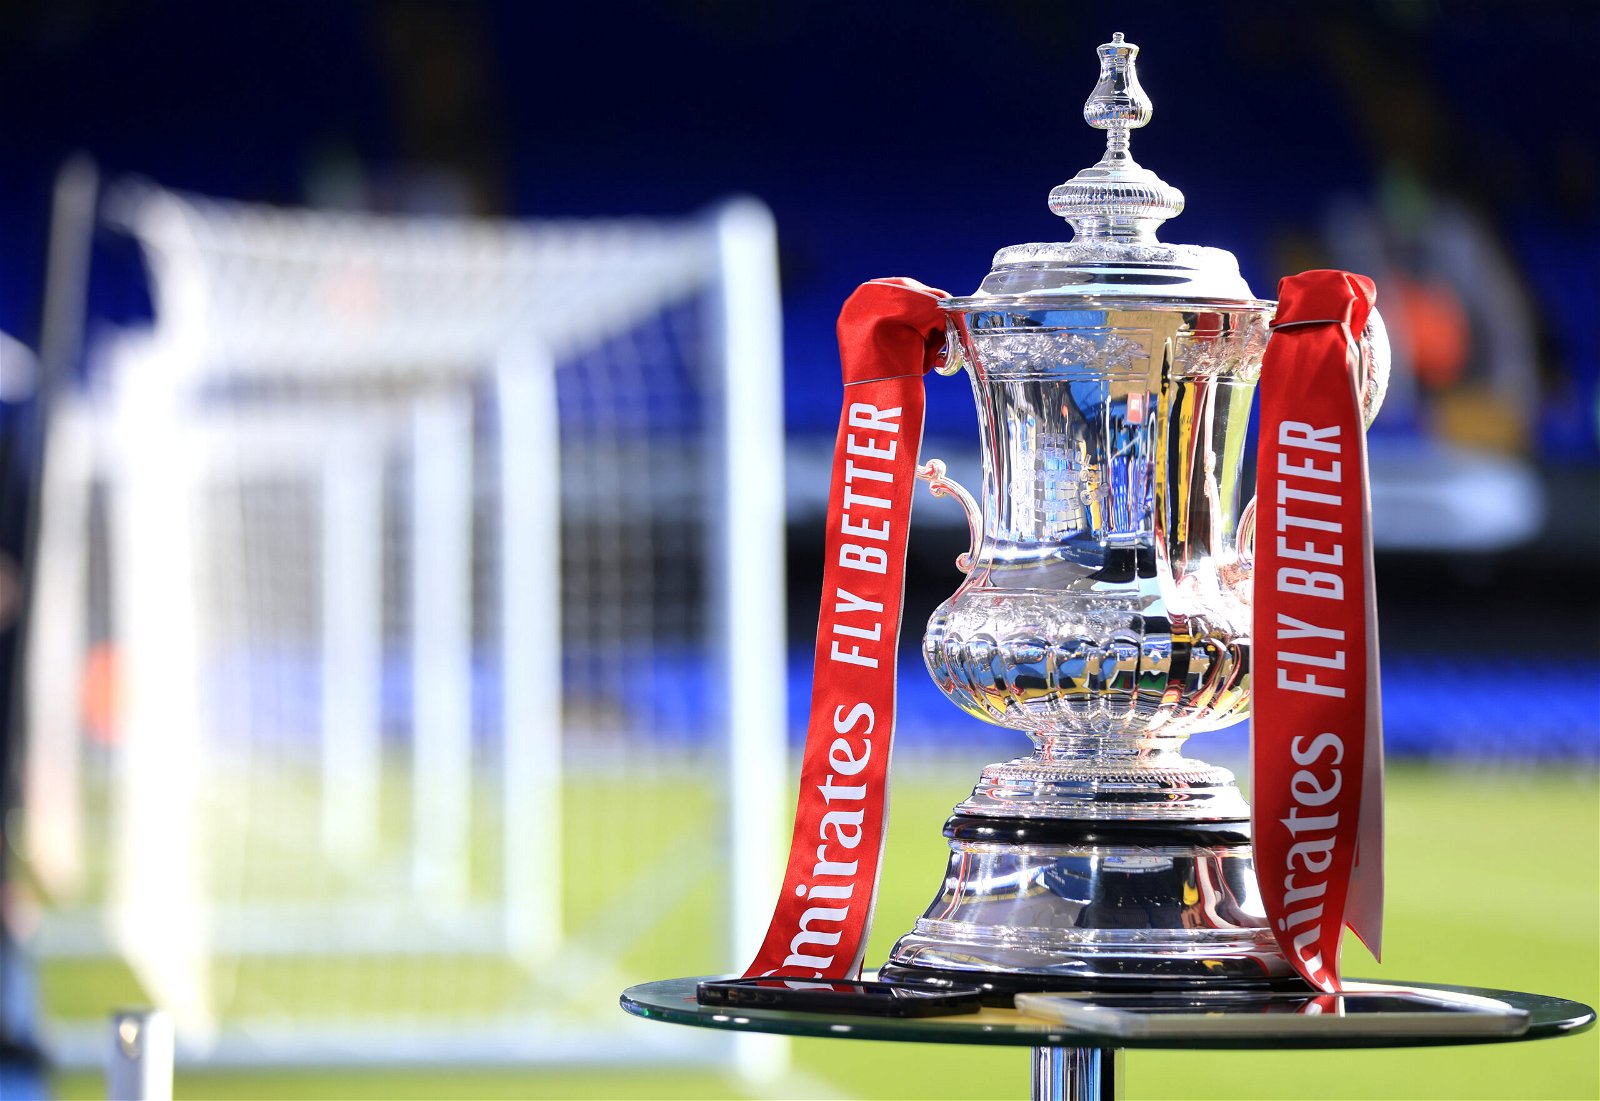 Ball numbers, how to watch live, fixture dates, potential opponents – Emirates FA Cup semi-final draw